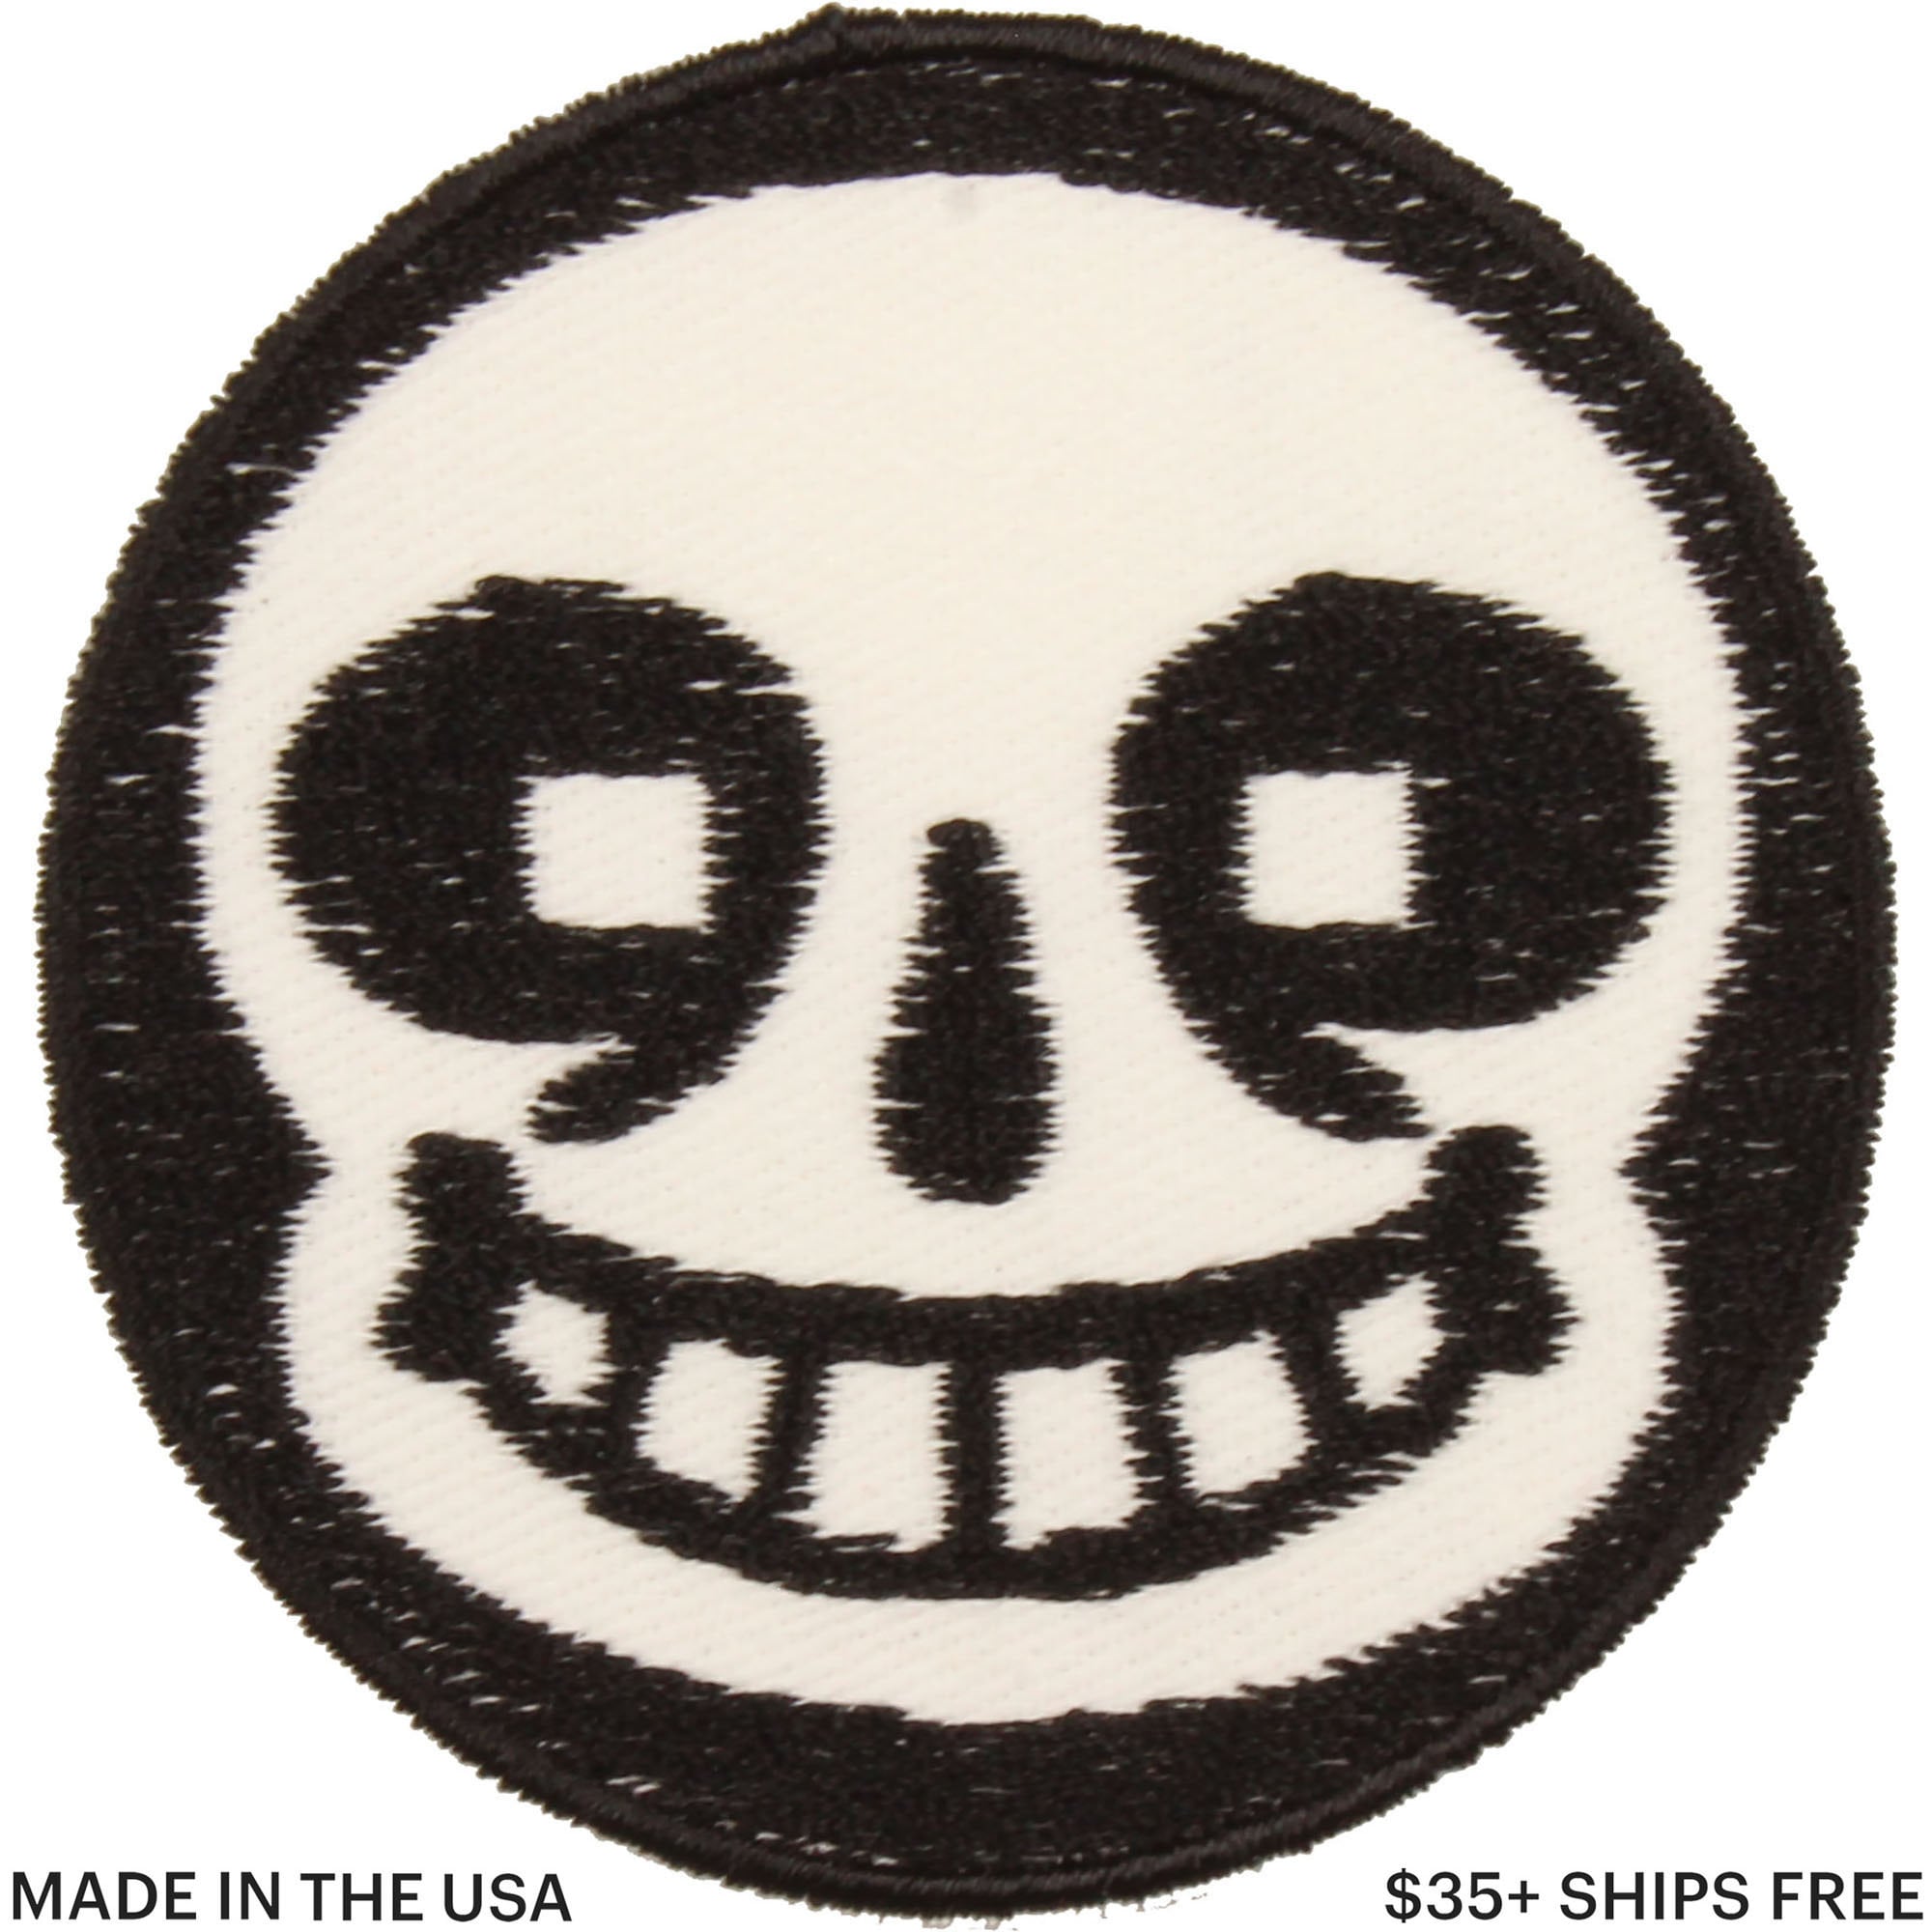 Skull Patches for Clothing, Punk Patches Black and White, Horror Iron on  Patches, Diy Clothes Sewing Vest Jacket 